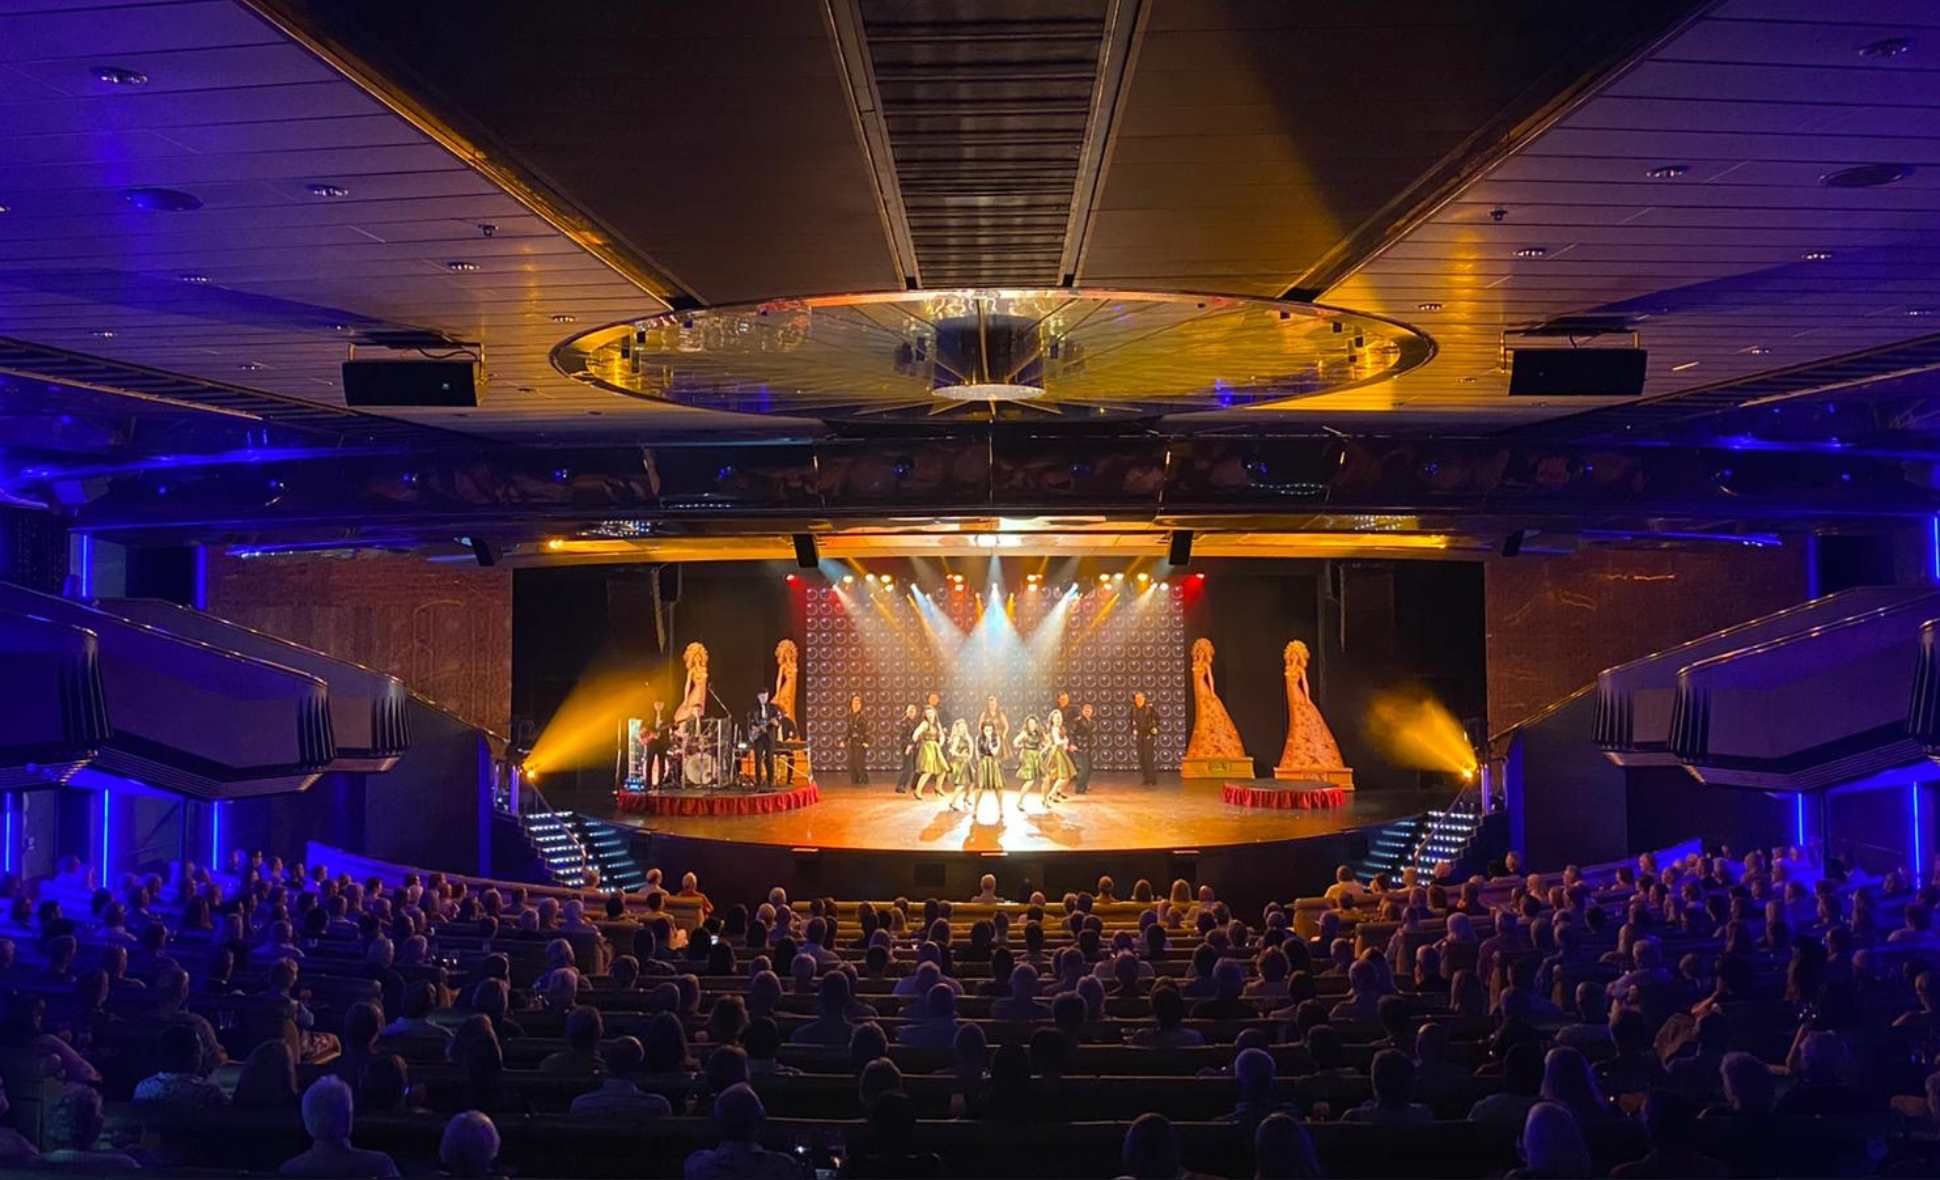 A theatre full of people watching a show on stage